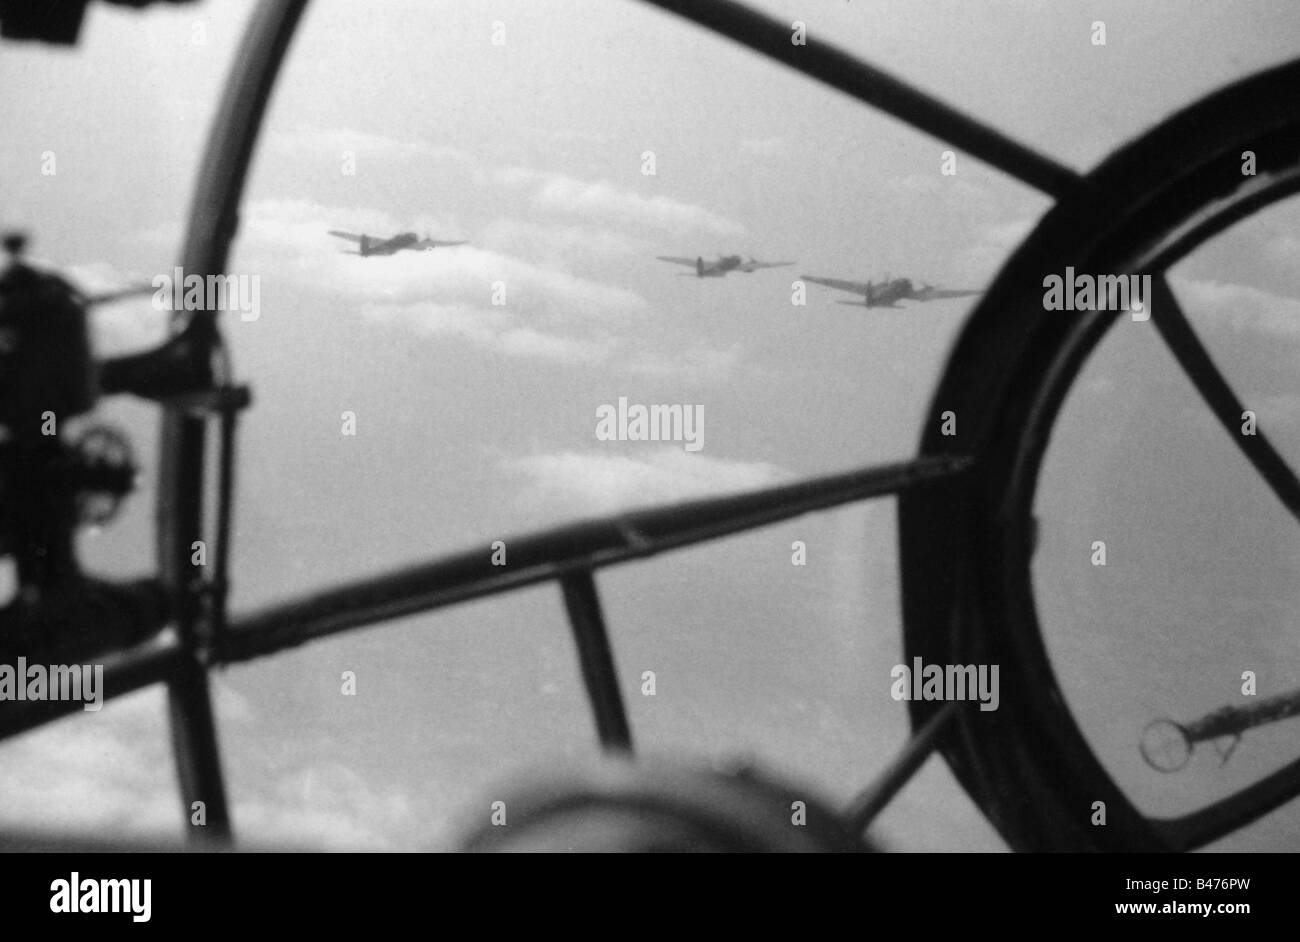 events, Second World War / WWII, aerial warfare, aircraft, details / interiors, view from the cockpit of a German bomber Heinkel He 111, formation on the way to England, August 1940, bombers, flight station, He-111, He111, MG, Luftwaffe, Wehrmacht, 20th century, historic, historical, plane, planes, Germany, Third Reich, Battle of Britain, clouds, 1940s, Stock Photo